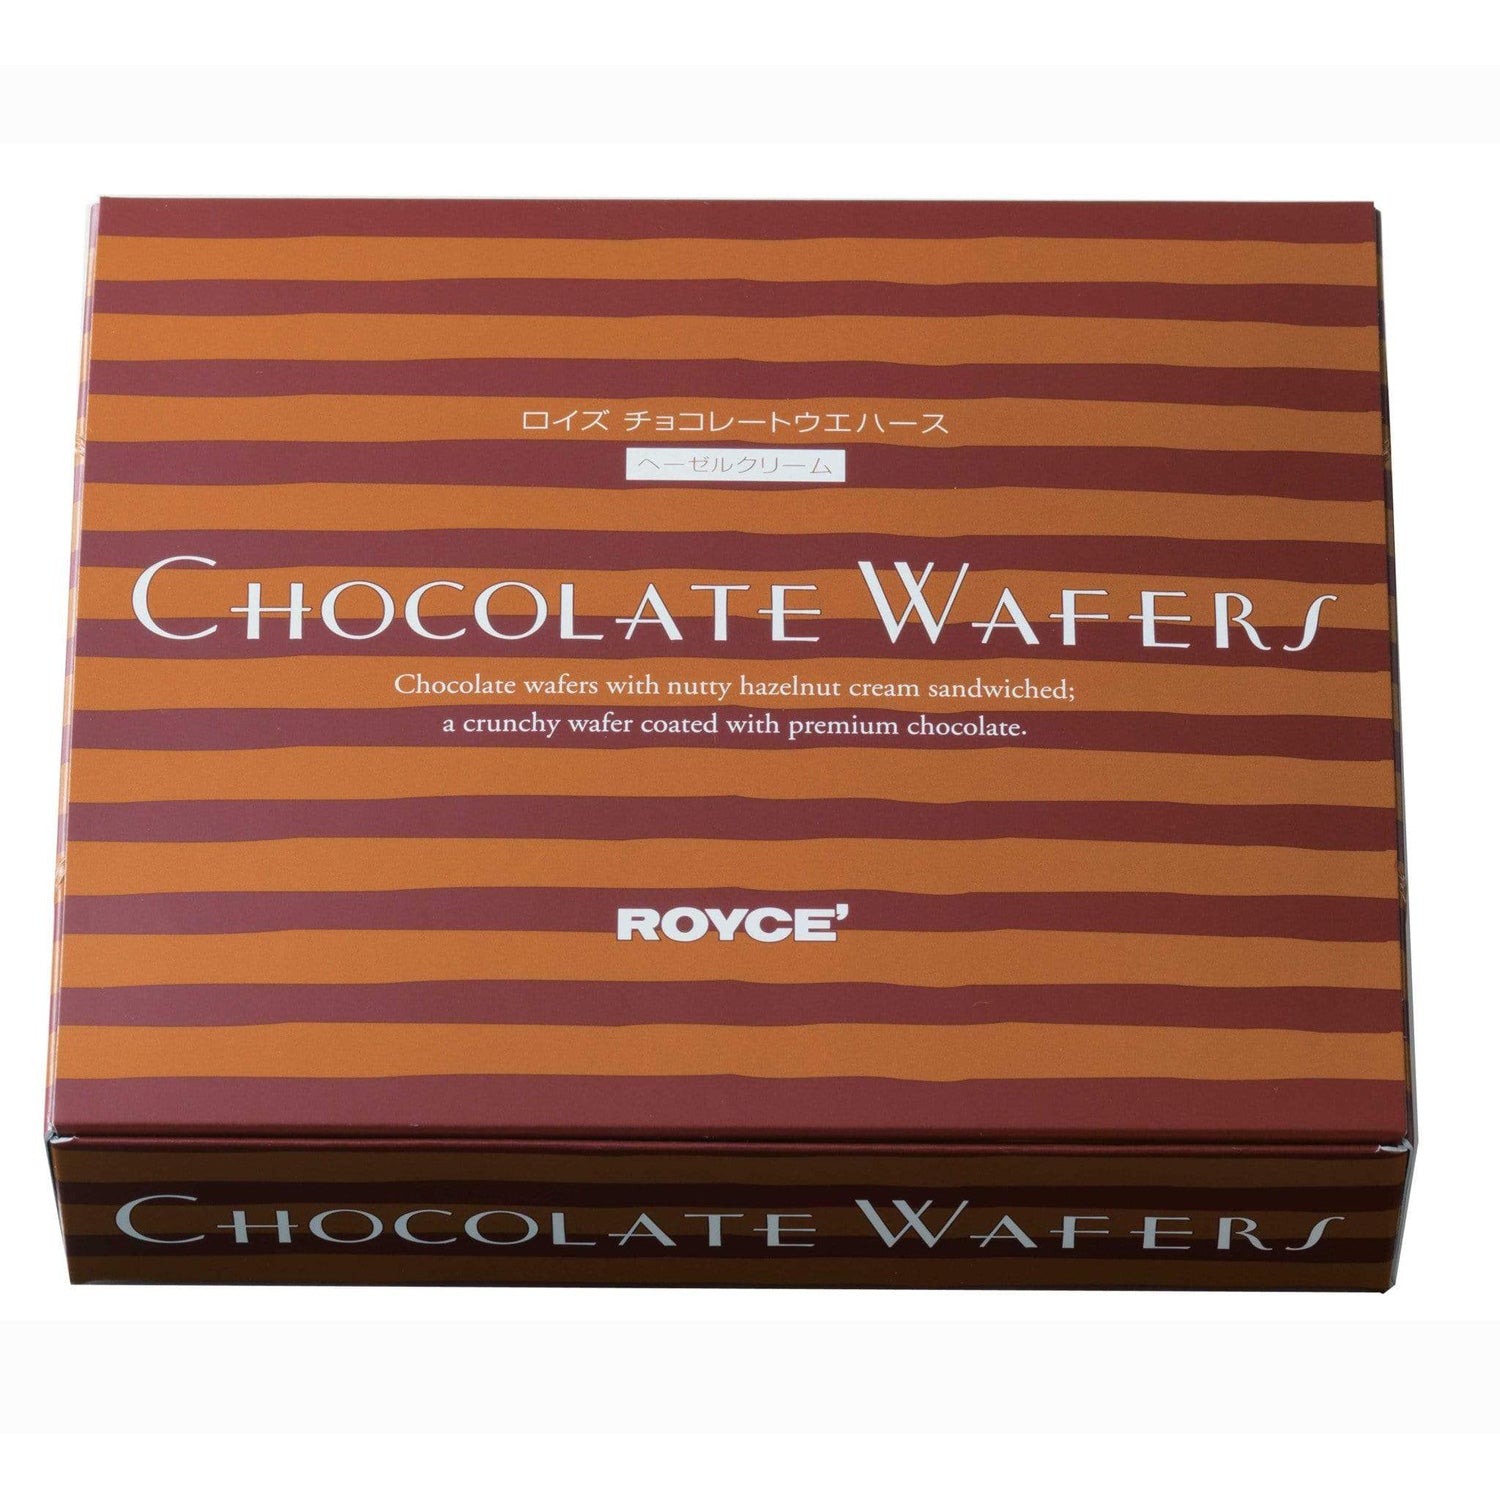 ROYCE' Chocolate - Chocolate Wafers "Hazel Cream" - Image shows a brown striped box. White text in the center says Chocolate Wafers Chocolate wafers with nutty hazelnut cream sandwiched; a crunchy wafer coated with premium chocolate. ROYCE'. Text on the bottom part says Chocolate Wafers.